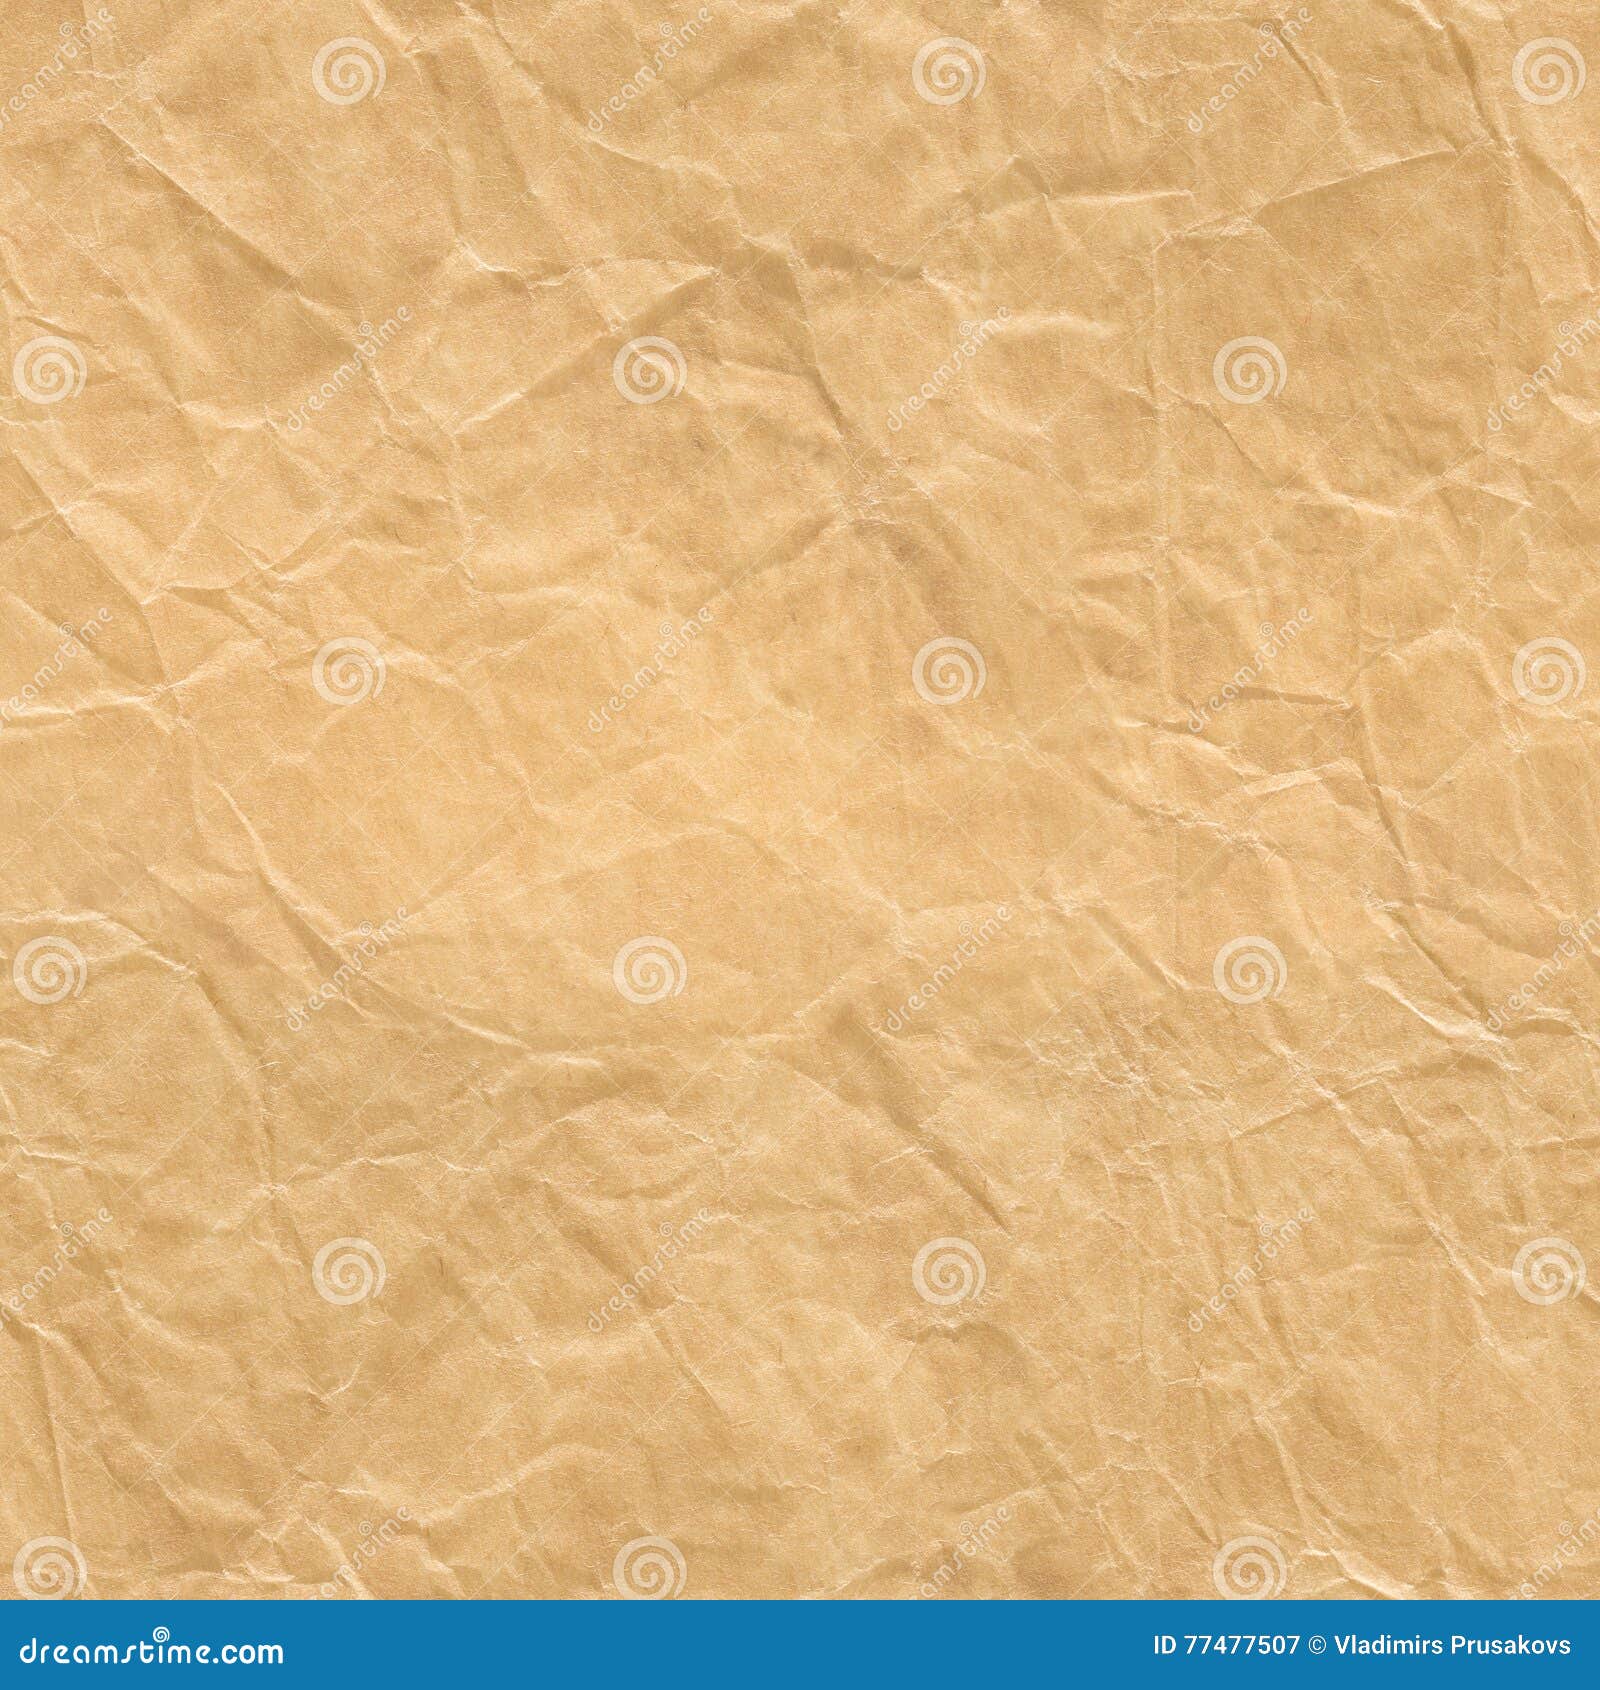 wrapping paper seamless texture, rumpled wrap background